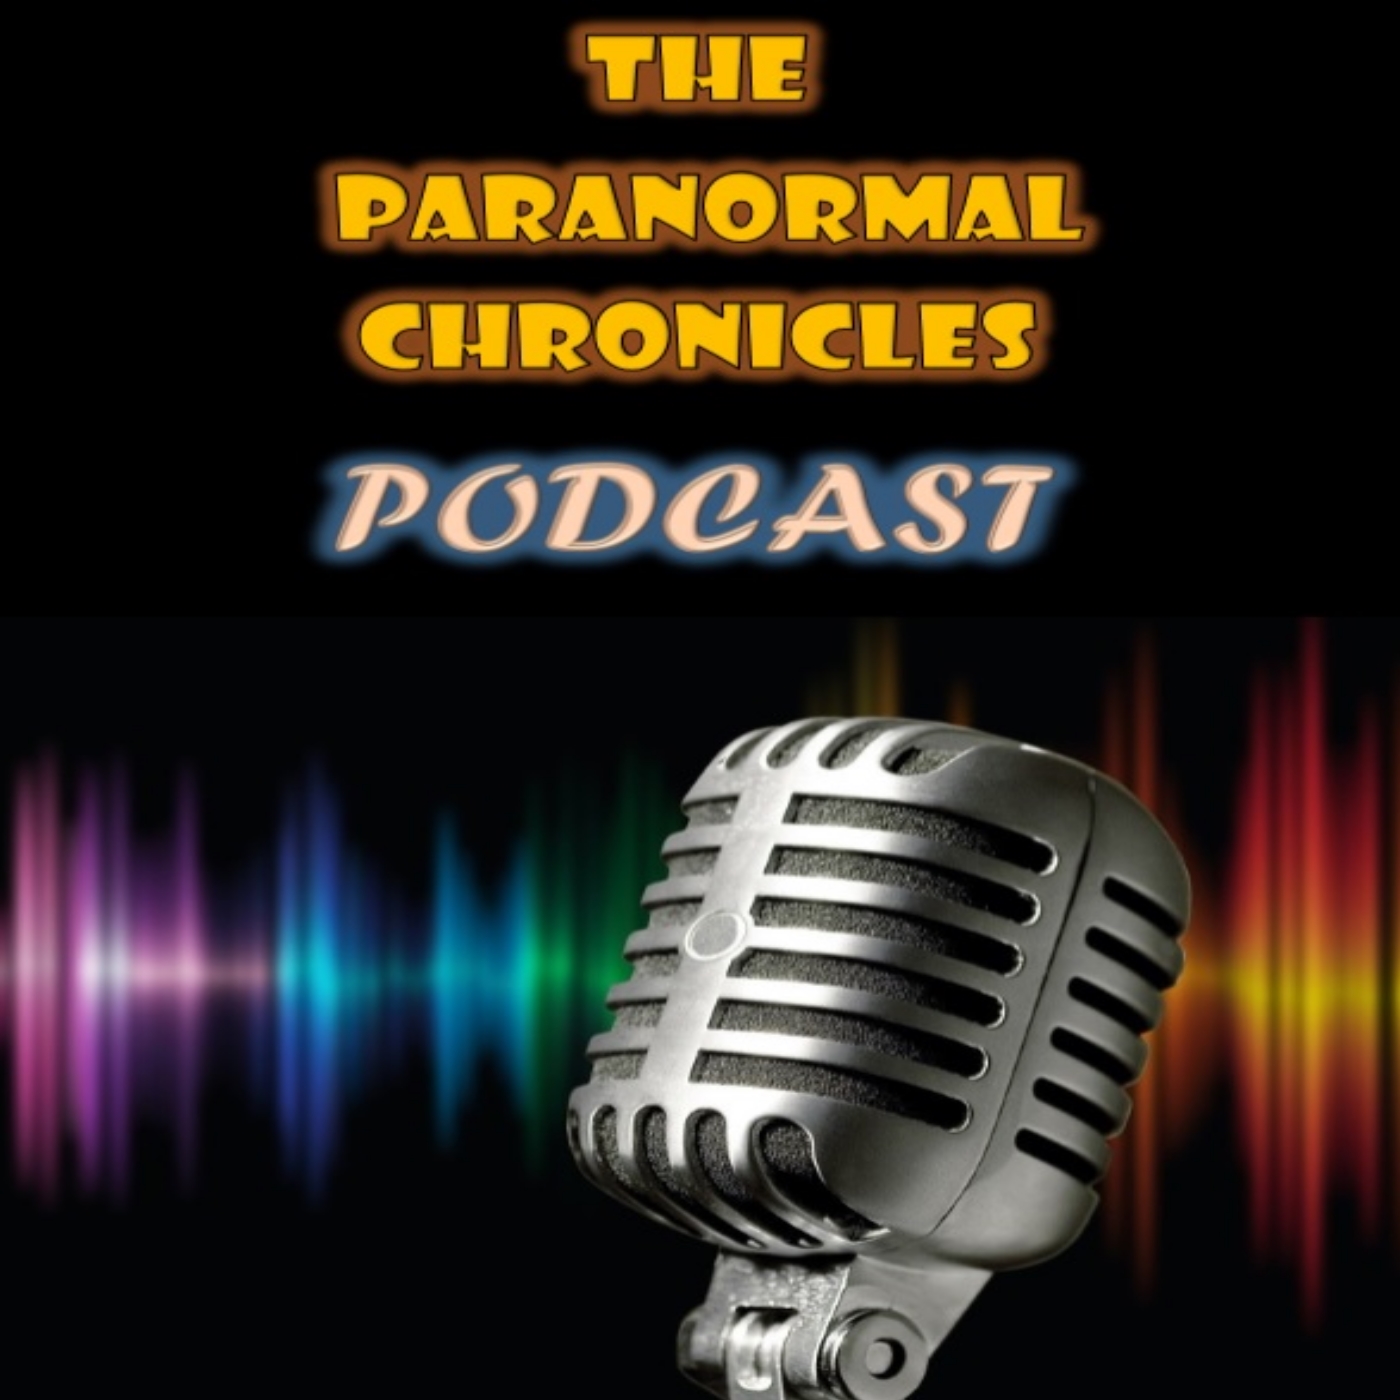 The Paranormal Chronicles podcast